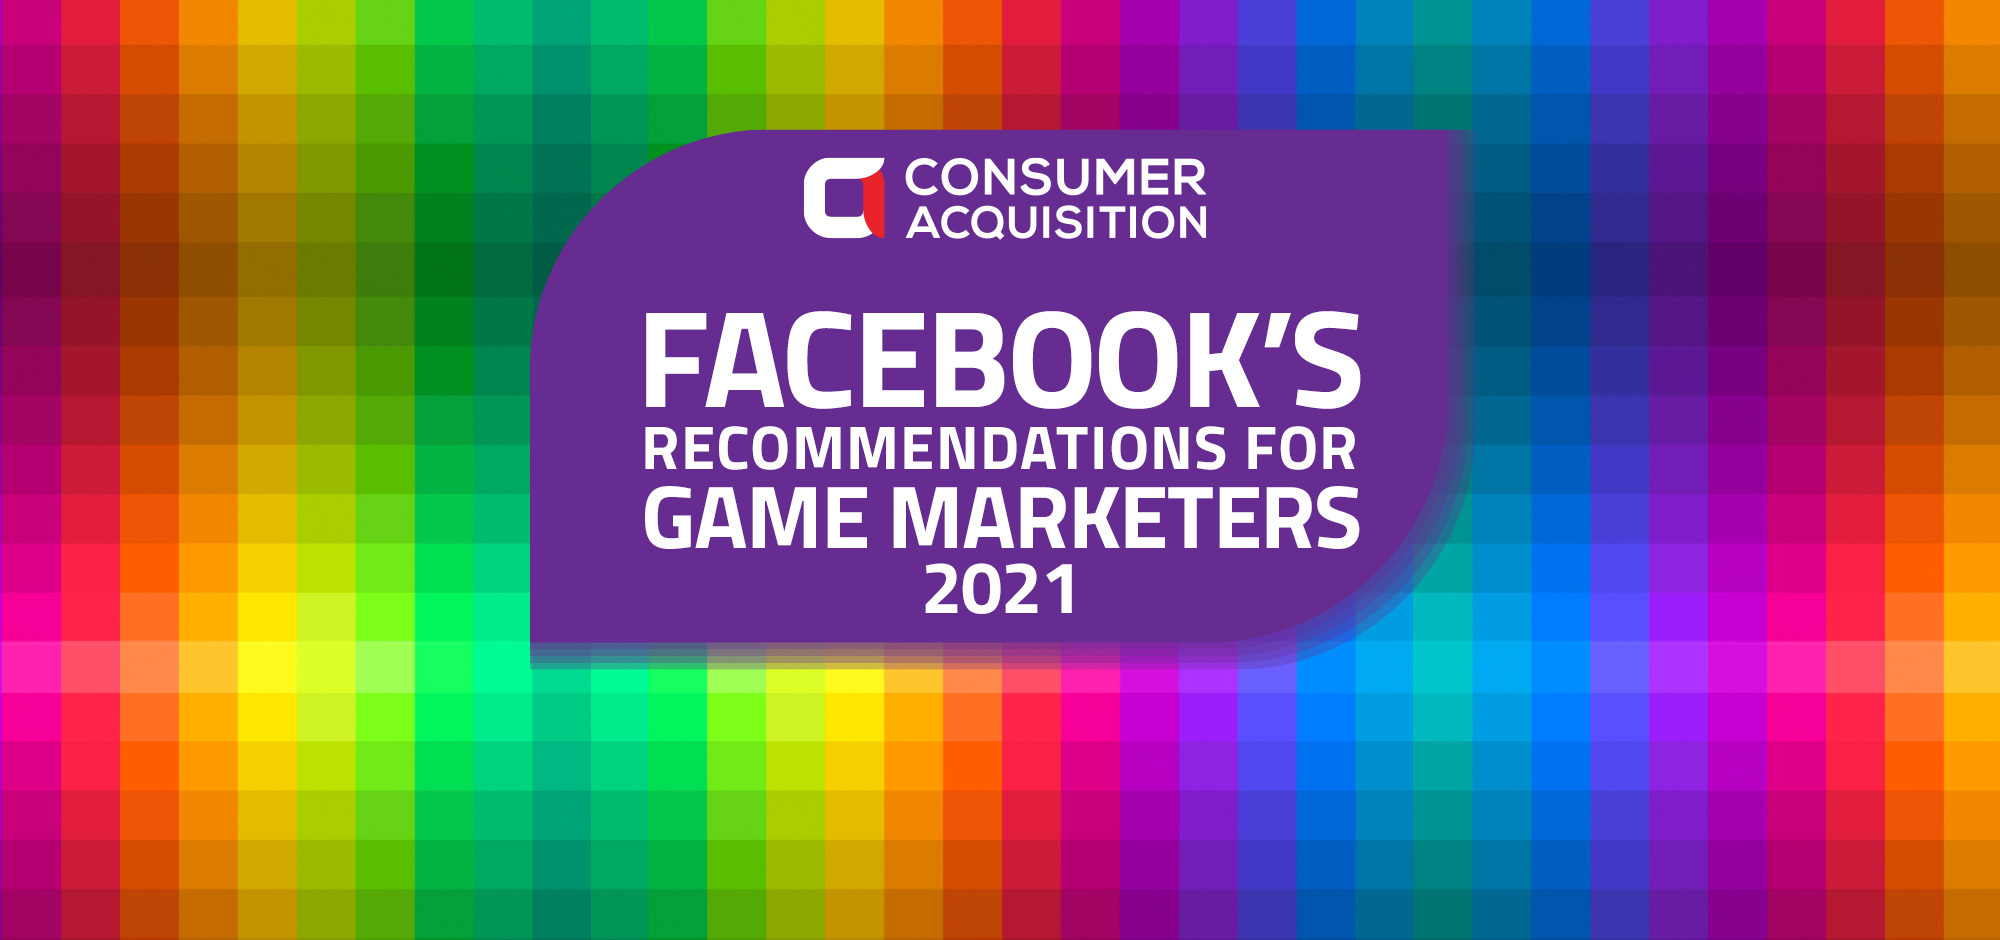 Facebook’s Creative Recommendations for Game Marketers in 2021